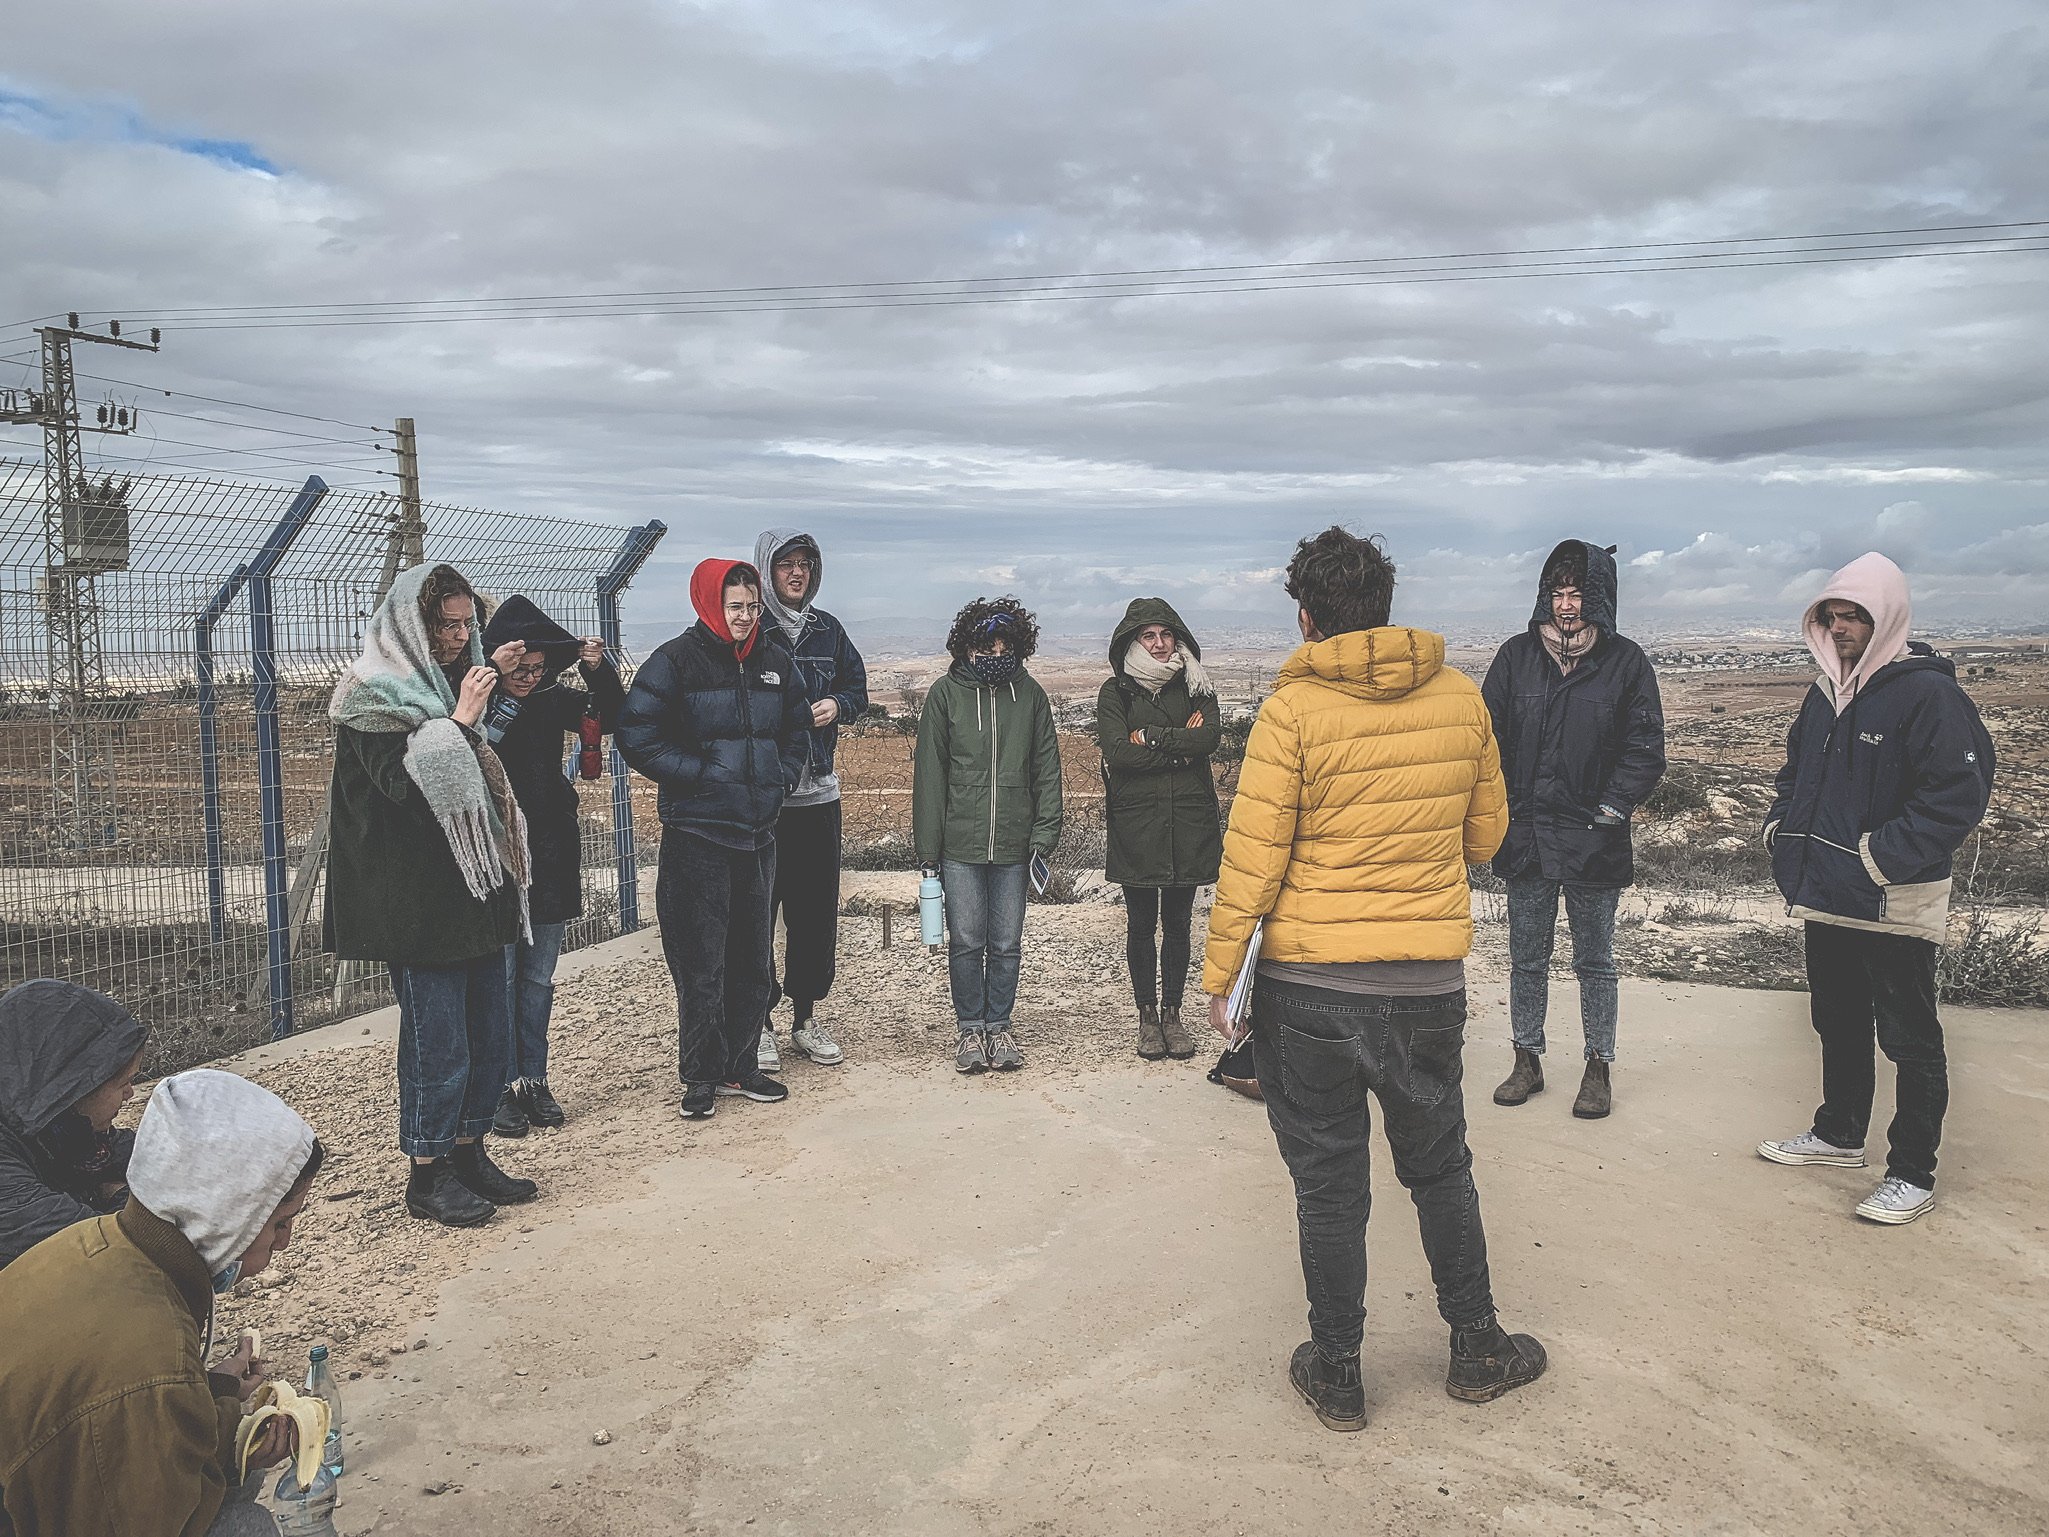  A group of people stand and listen to aperson in a yellow parka speaking in front of cloudy skies in Israel / Palestine. 